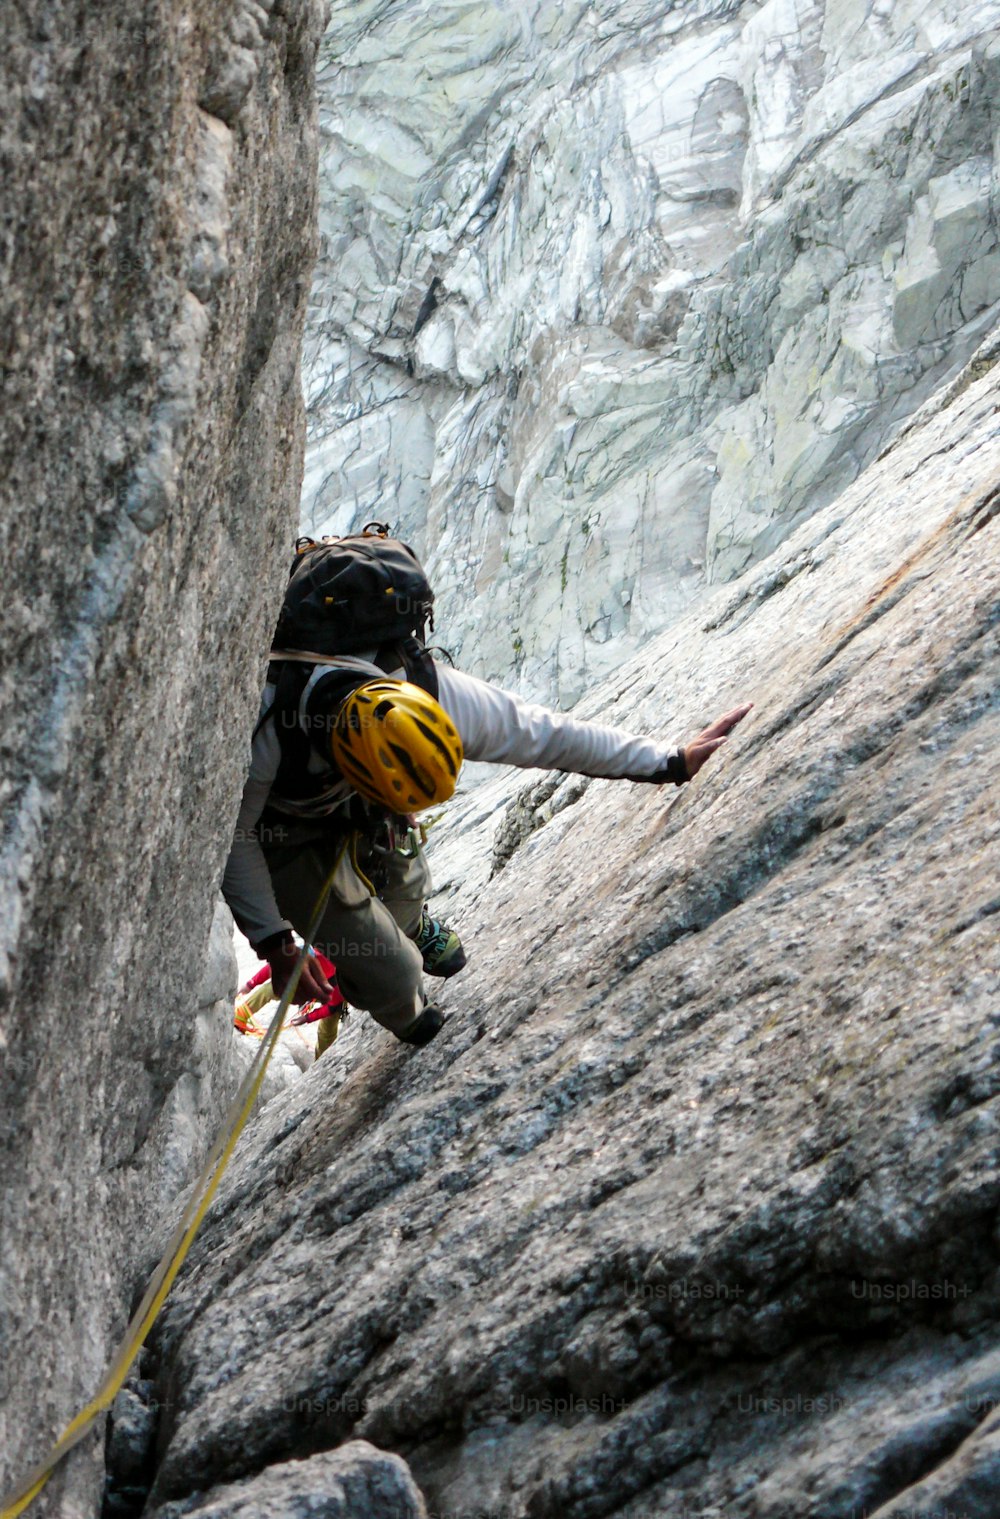 Male mountain climber in a difficult granite chimney of a classic route in the Swiss Alps